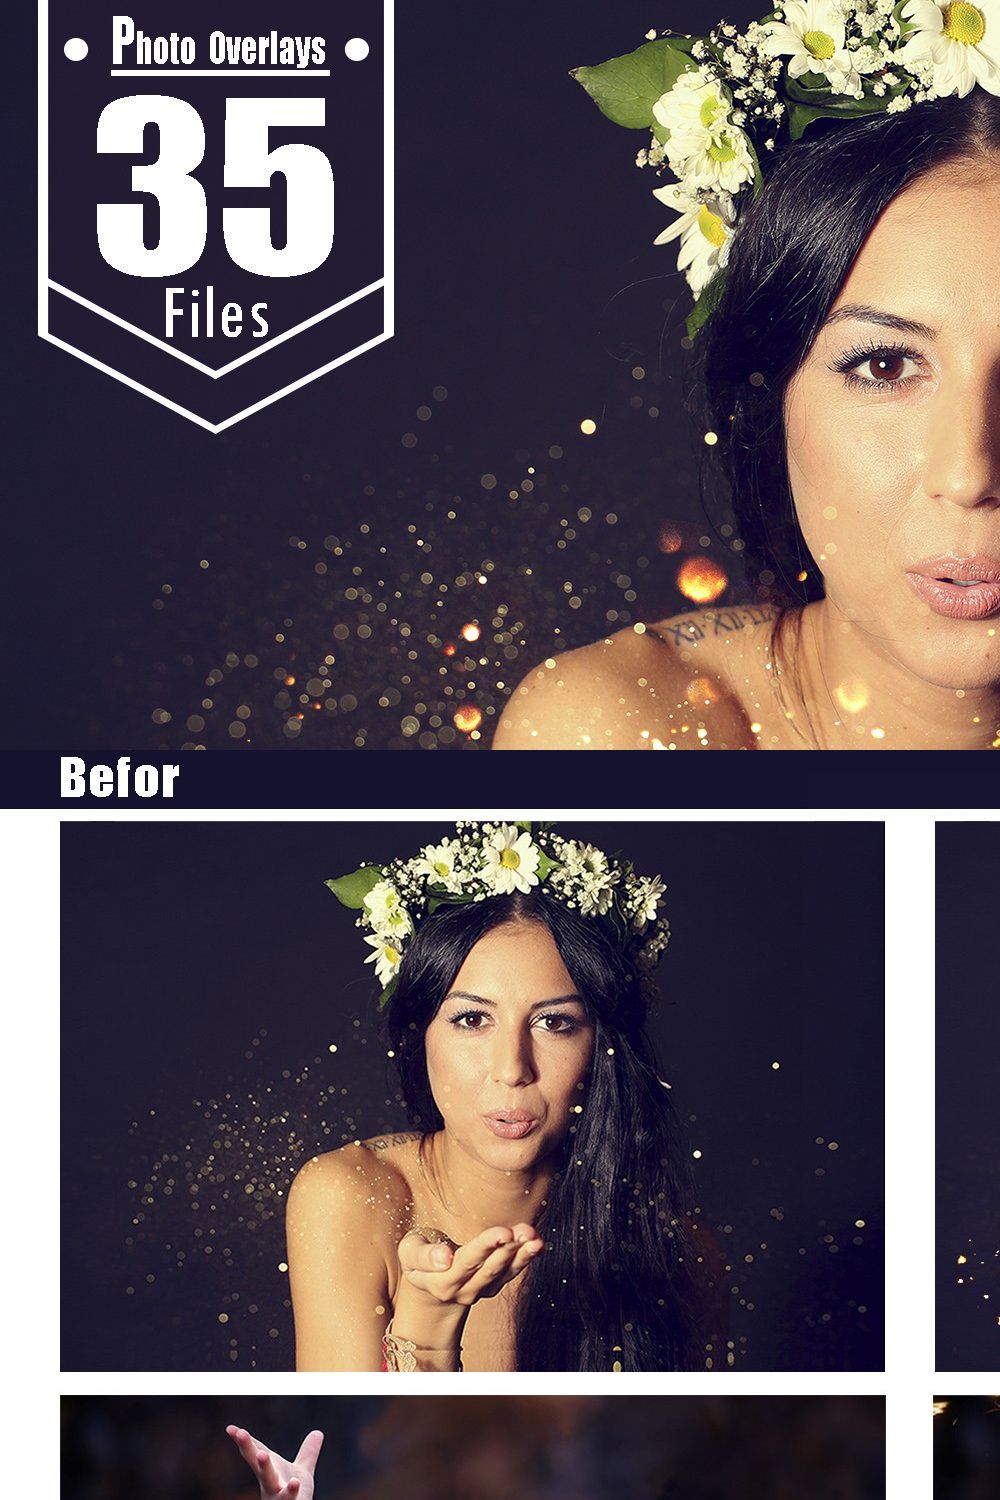 35 Blowing glitter Photoshop overlay pinterest preview image.